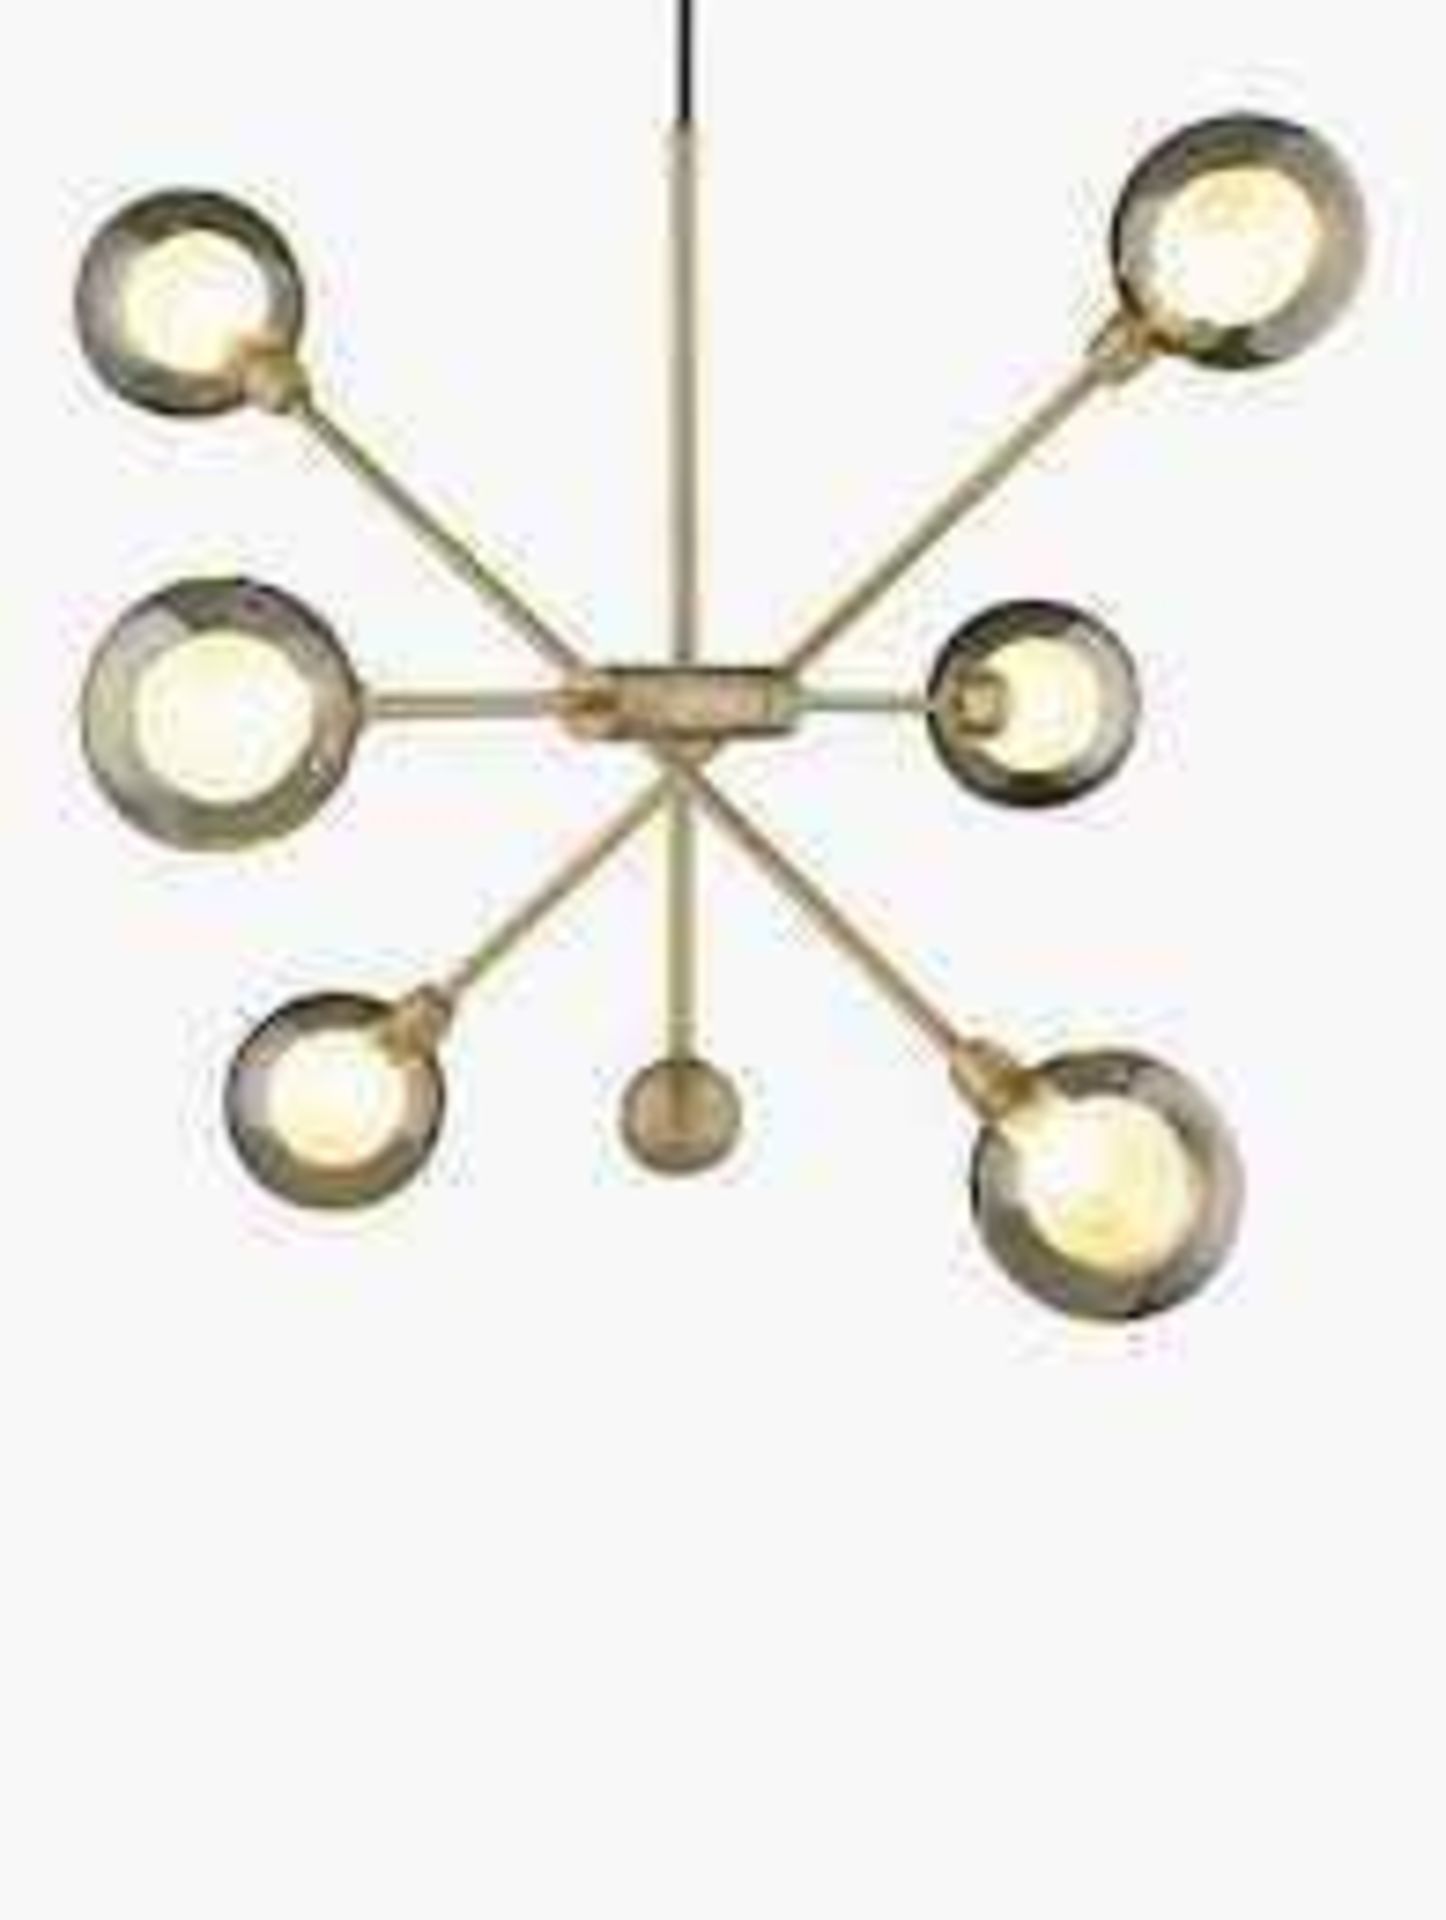 RRP £210 Boxed Brand New John Lewis And Partners Huxley 6 Light Steel Finish Designer Ceiling